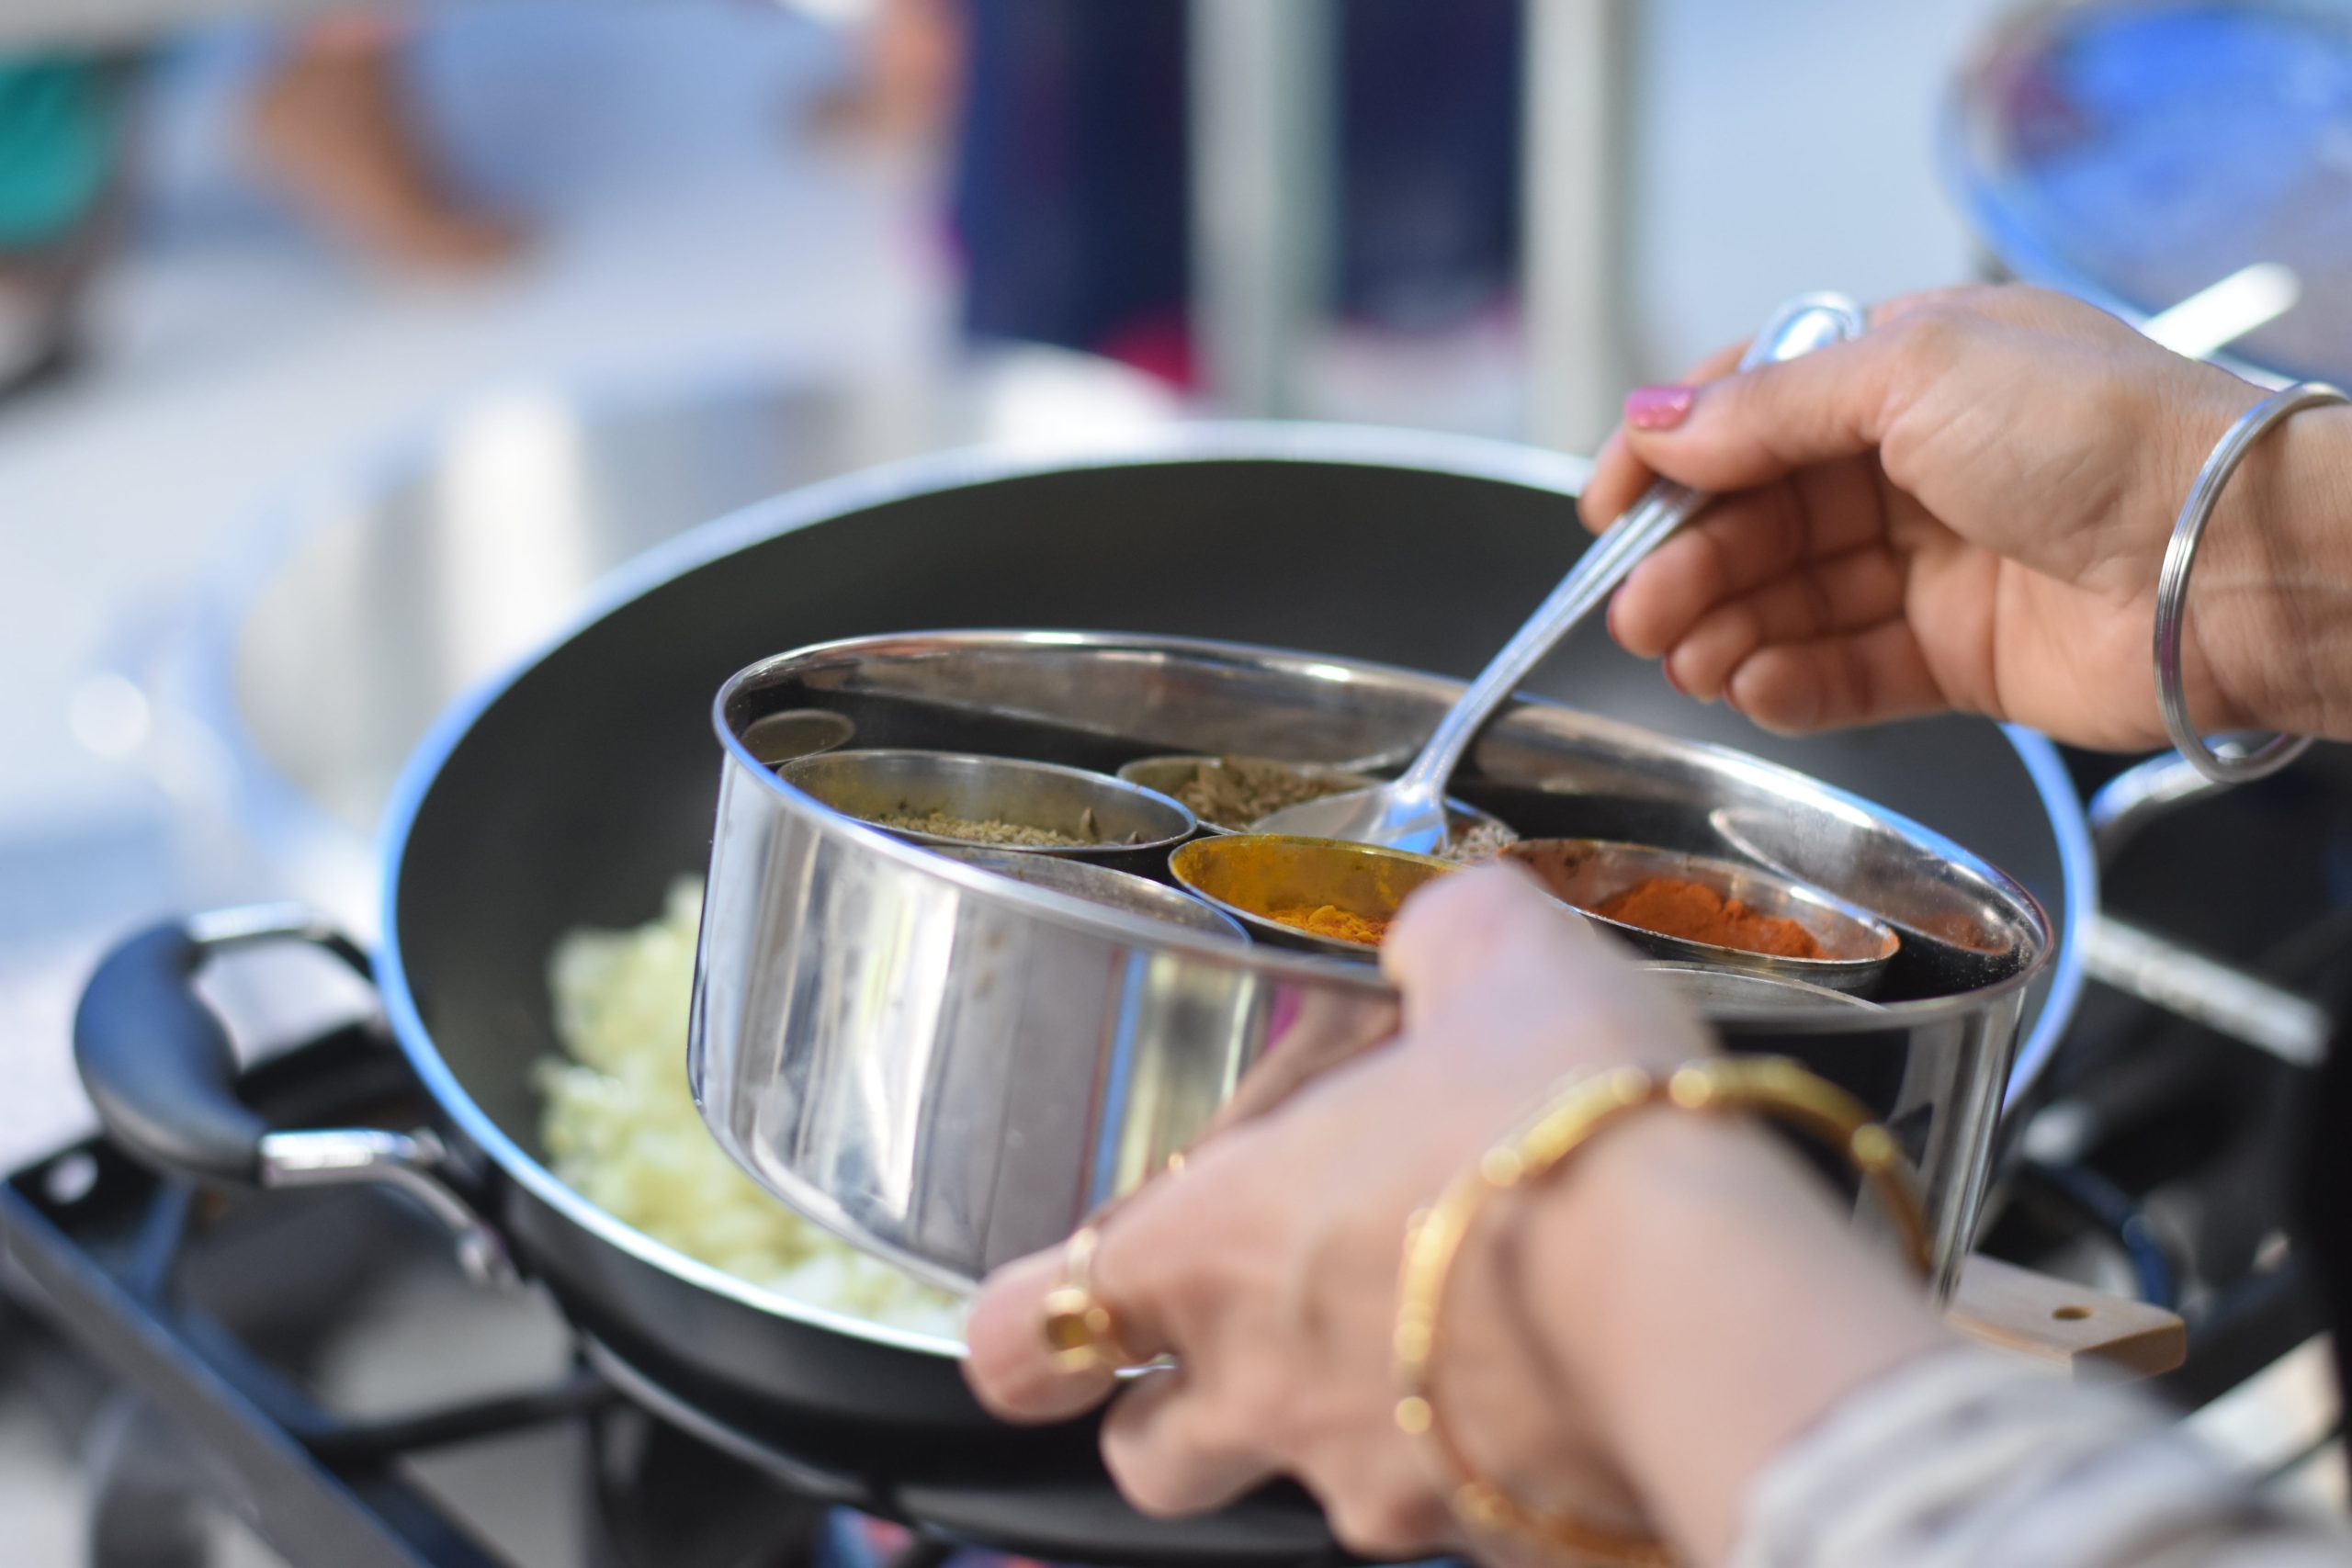 Cookcell vs Hexclad: Which Cookware Reigns Supreme?